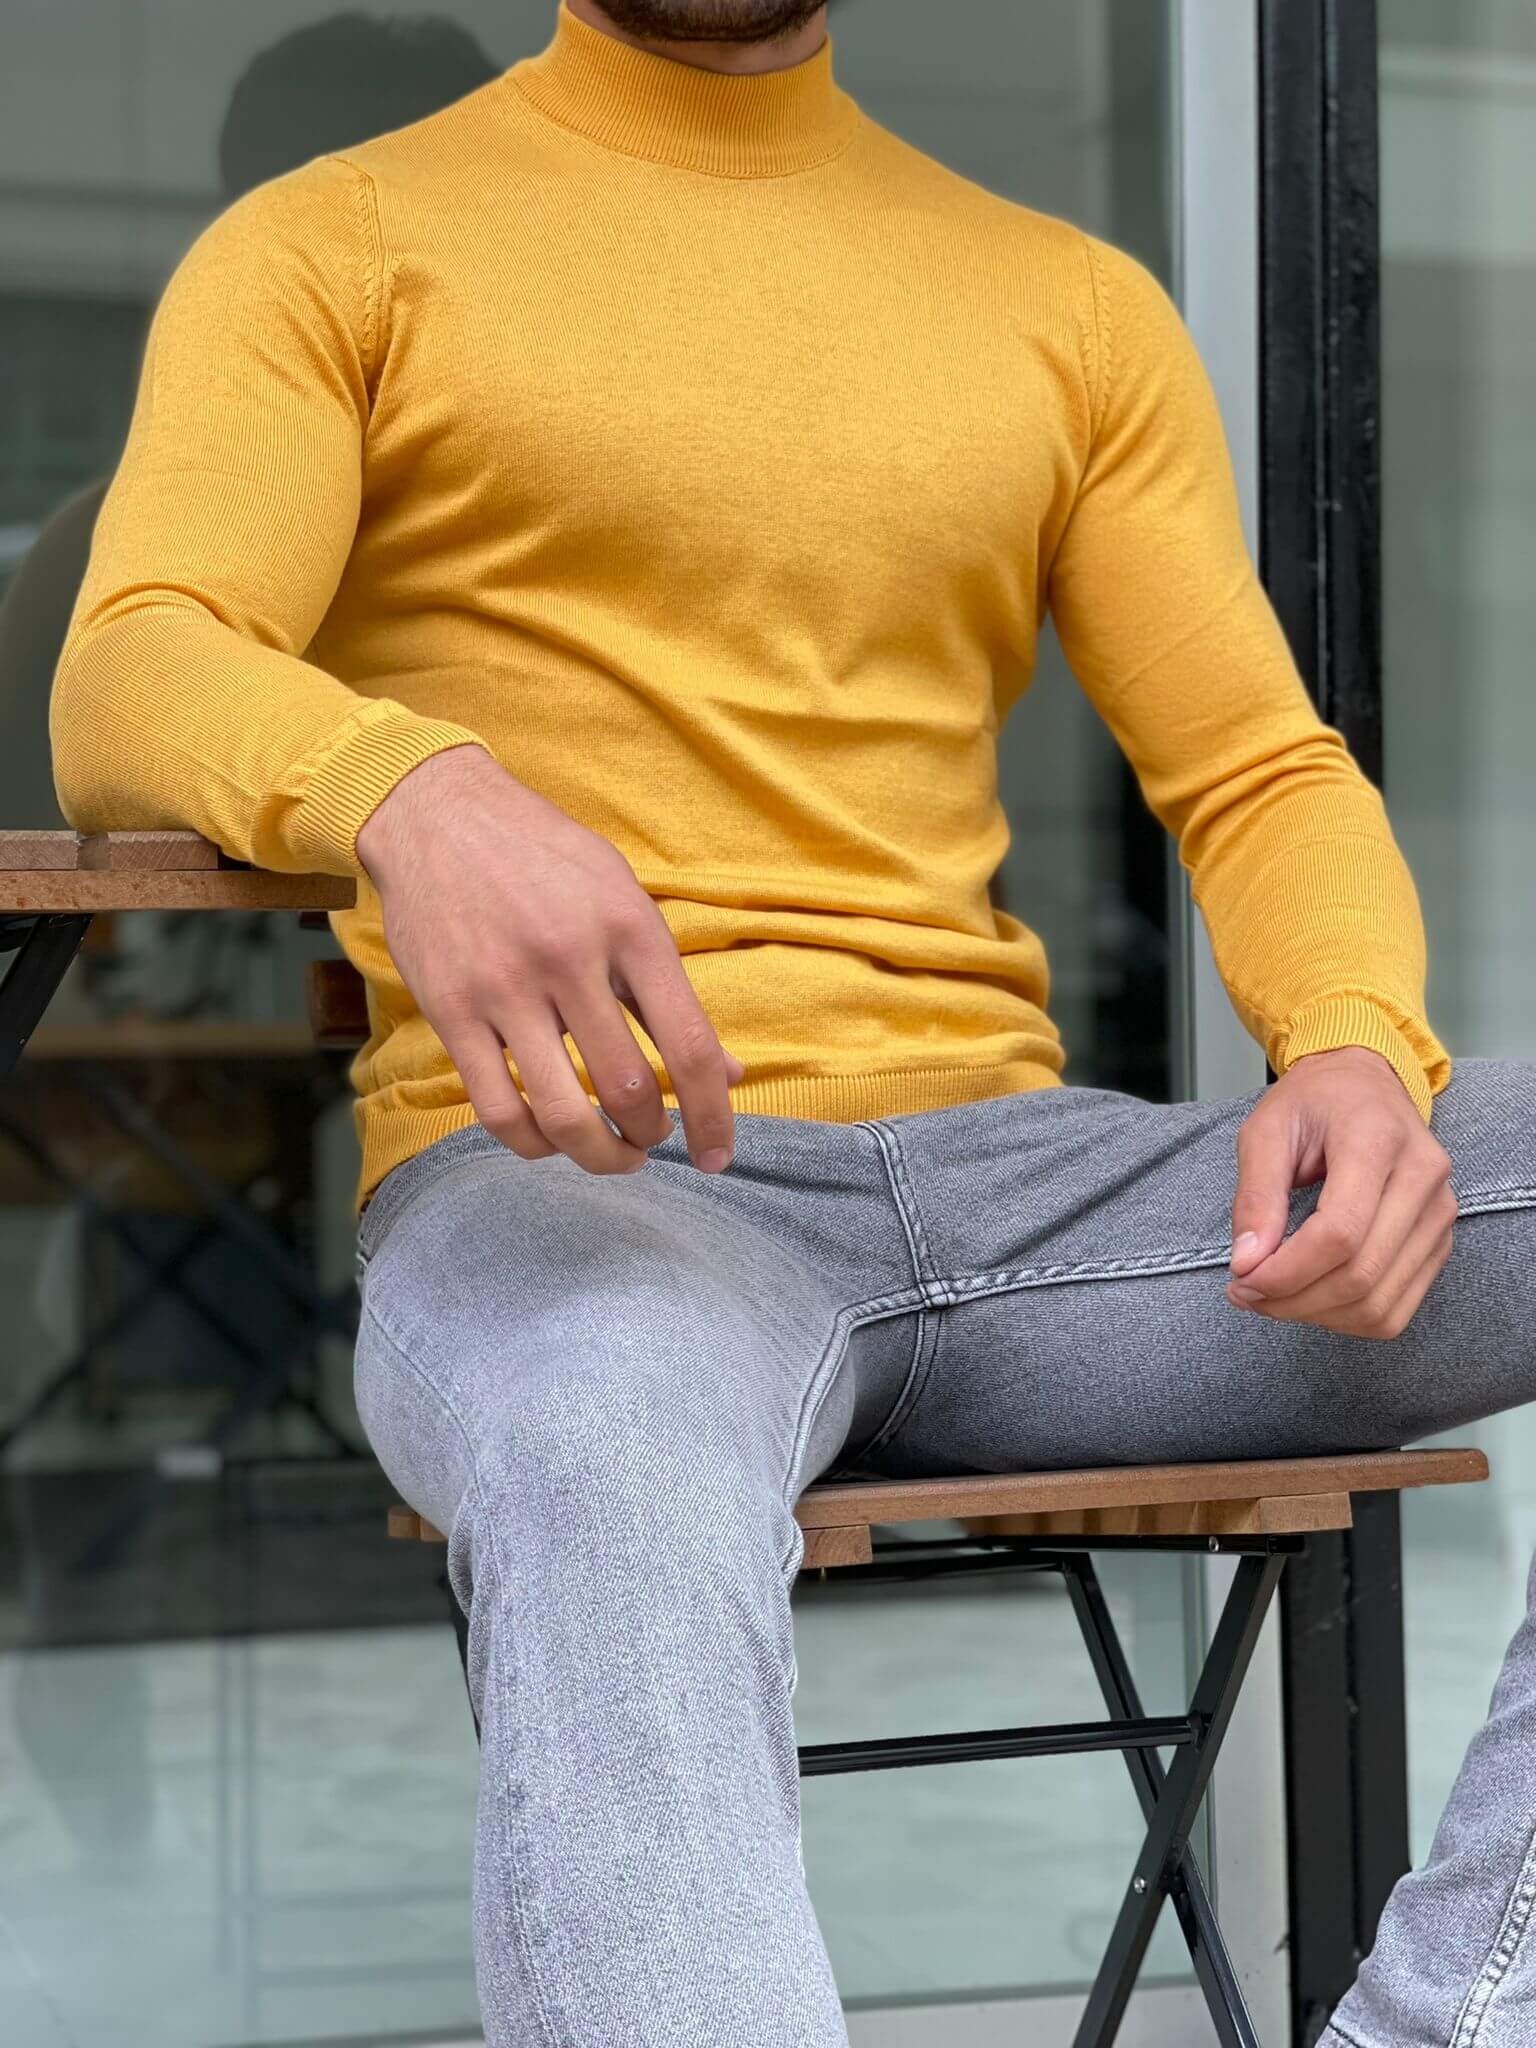 "An Osaka Mustard Half Turtleneck sweater, featuring a warm mustard color, a cozy half turtleneck collar, and a stylish design perfect for cooler weather."